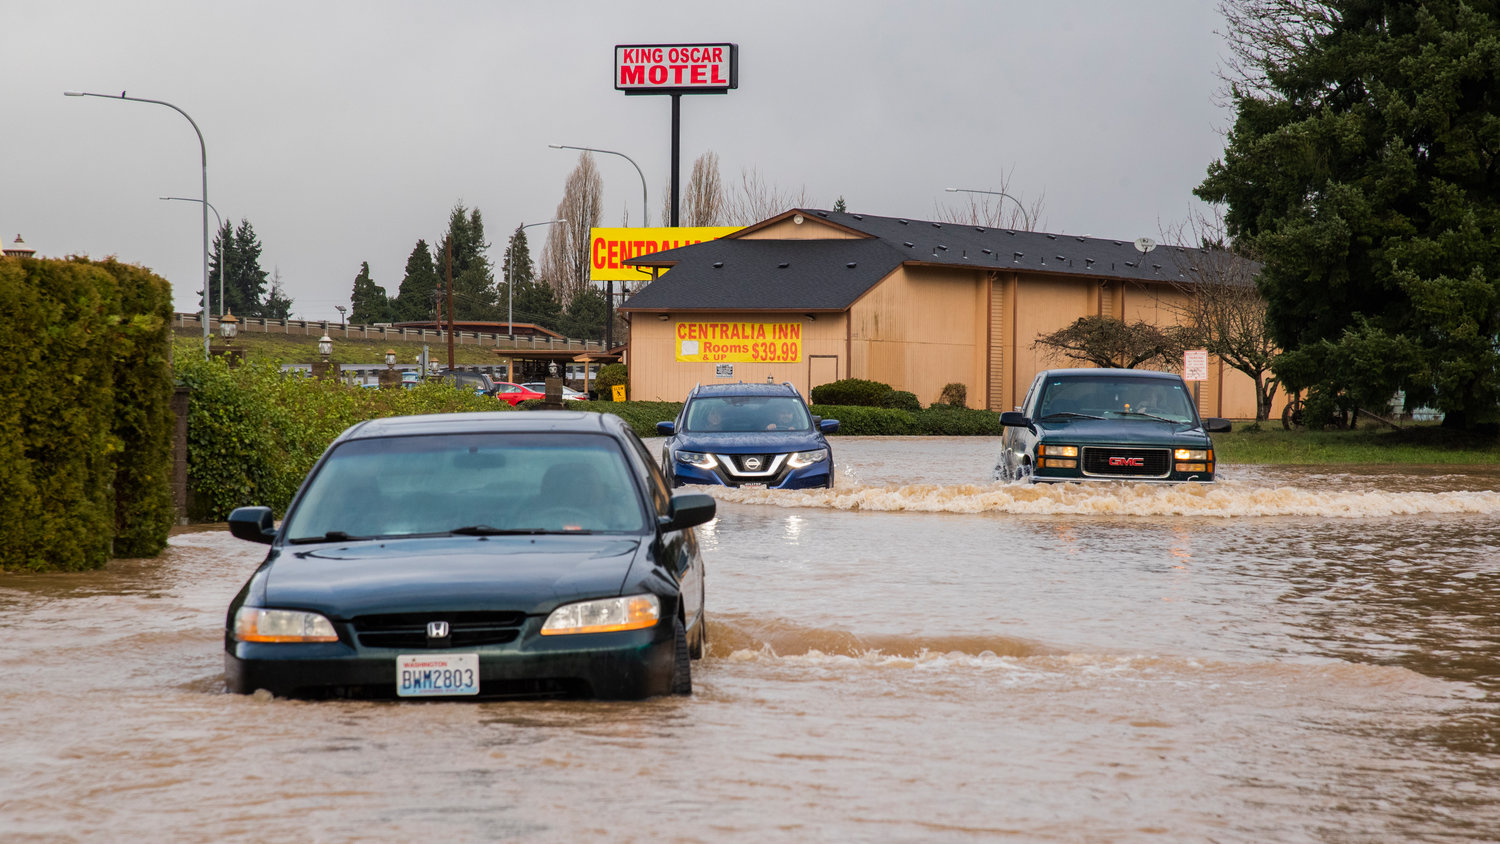 Drivers make their way through floodwaters along Eckerson Road in Centralia Friday morning as some cars remain stranded.